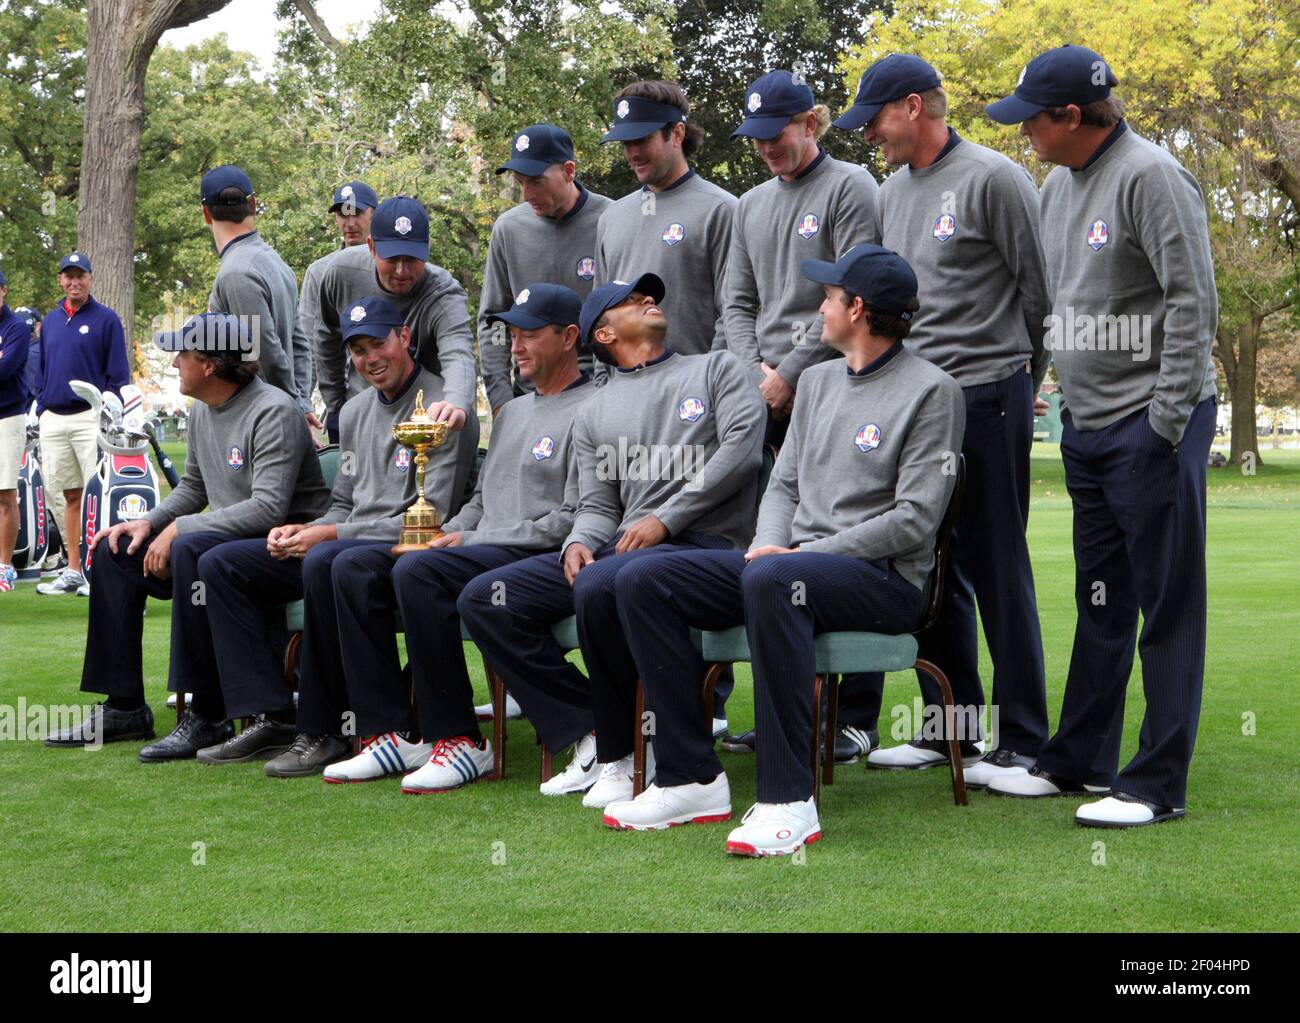 Tiger Woods, front row, second from right, looks back at teammates after someone popped his cap forward as the U.S